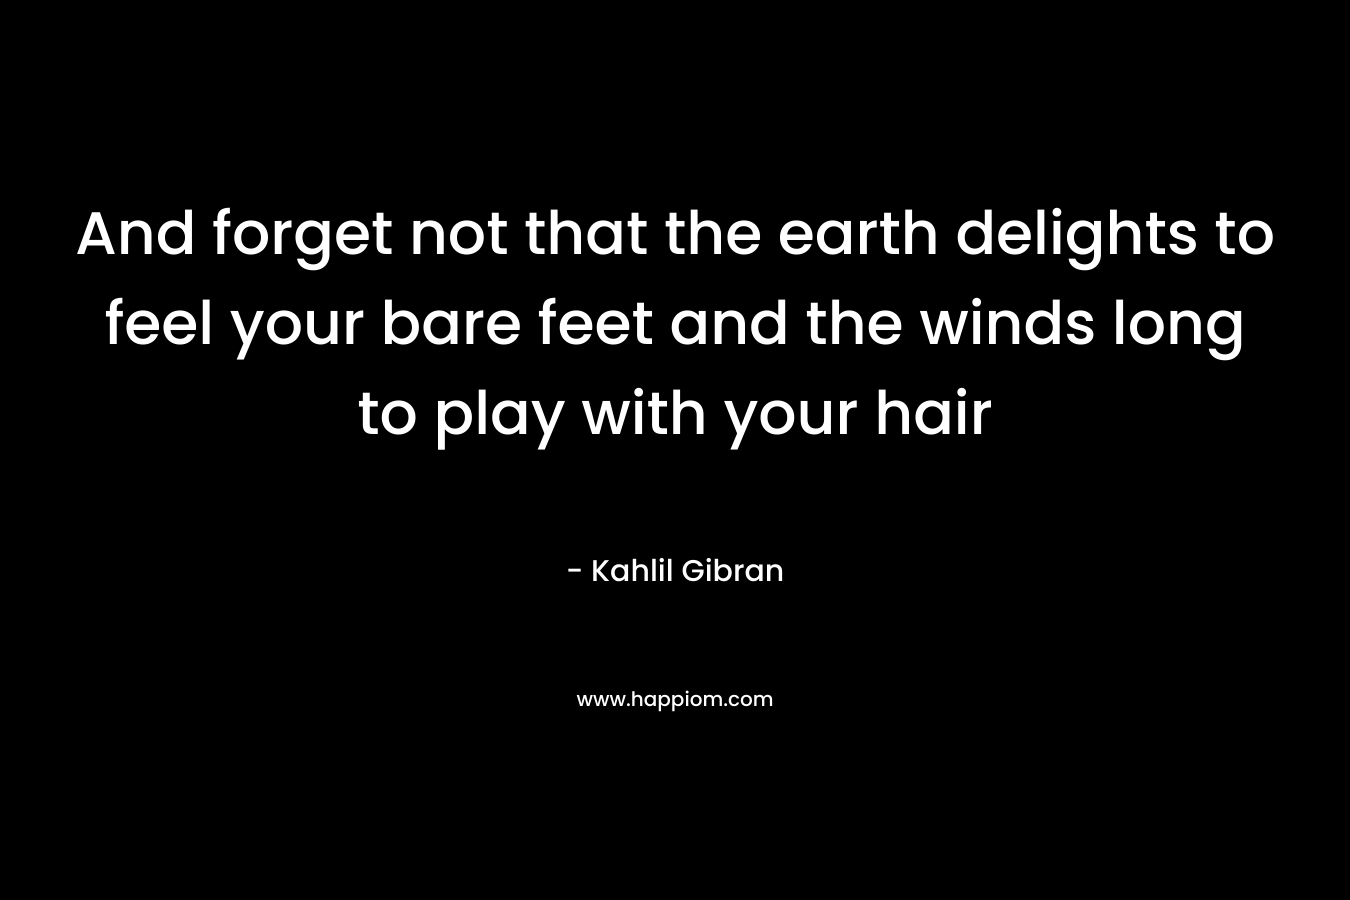 And forget not that the earth delights to feel your bare feet and the winds long to play with your hair – Kahlil Gibran